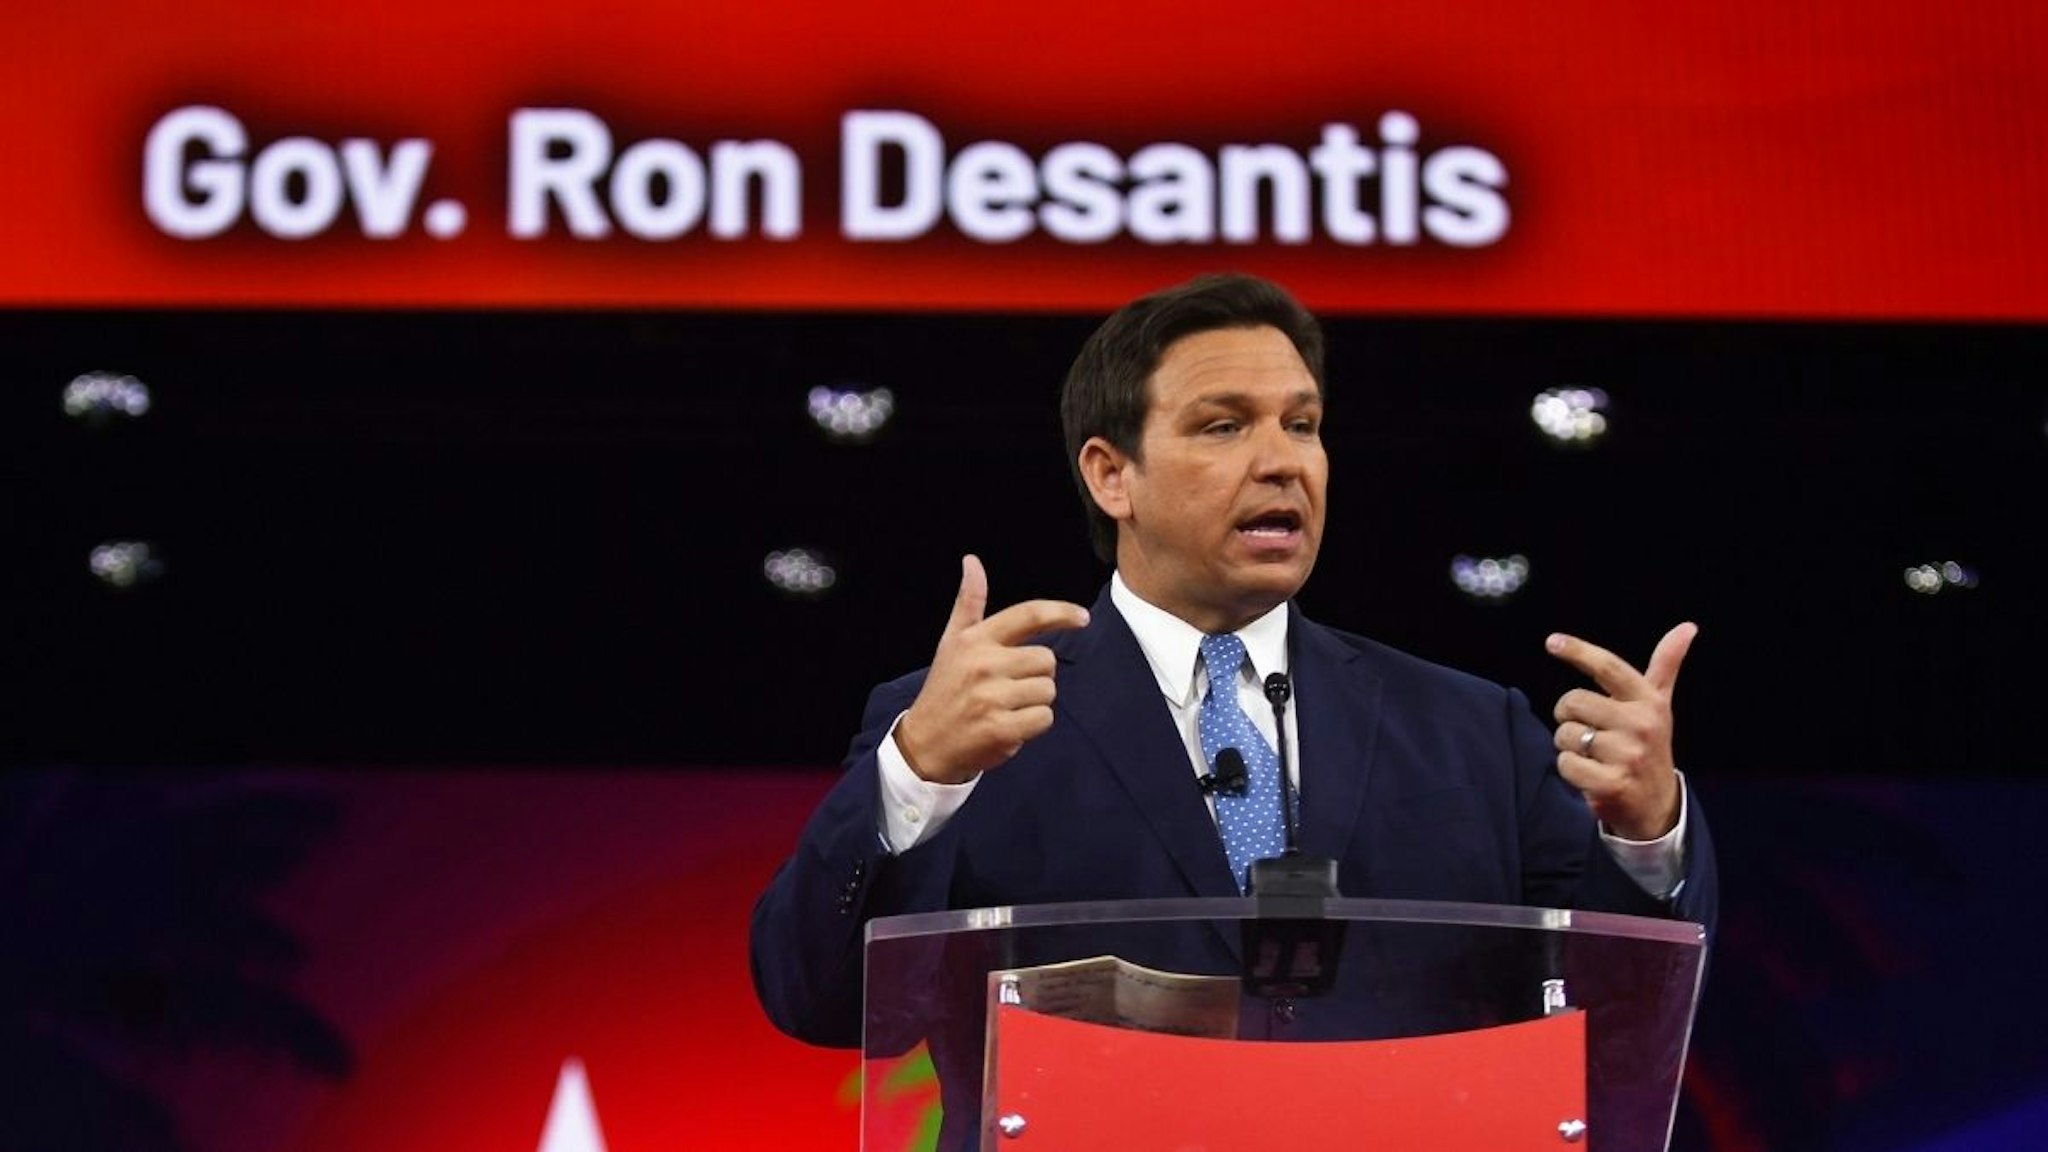 Florida Republican Governor Ron DeSantis addresses attendees on day one of the 2022 Conservative Political Action Conference (CPAC) in Orlando.